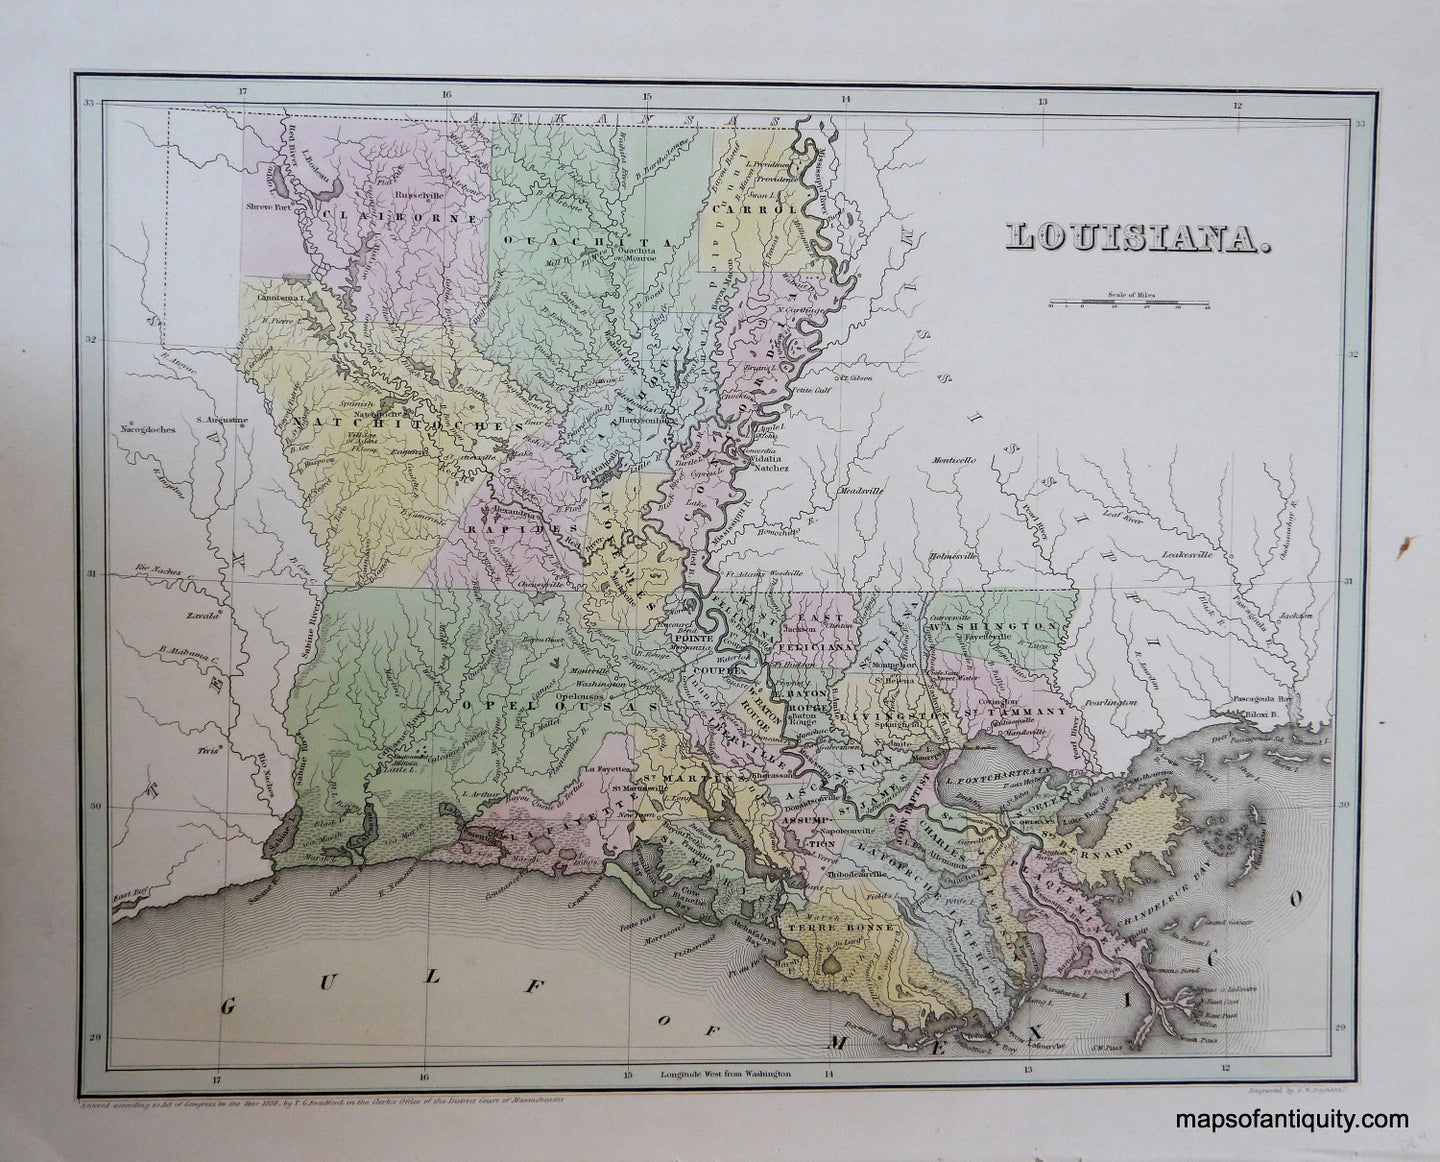 Antique-Hand-Colored-Map-Louisiana.-******-United-States-South-1838-Bradford-Maps-Of-Antiquity